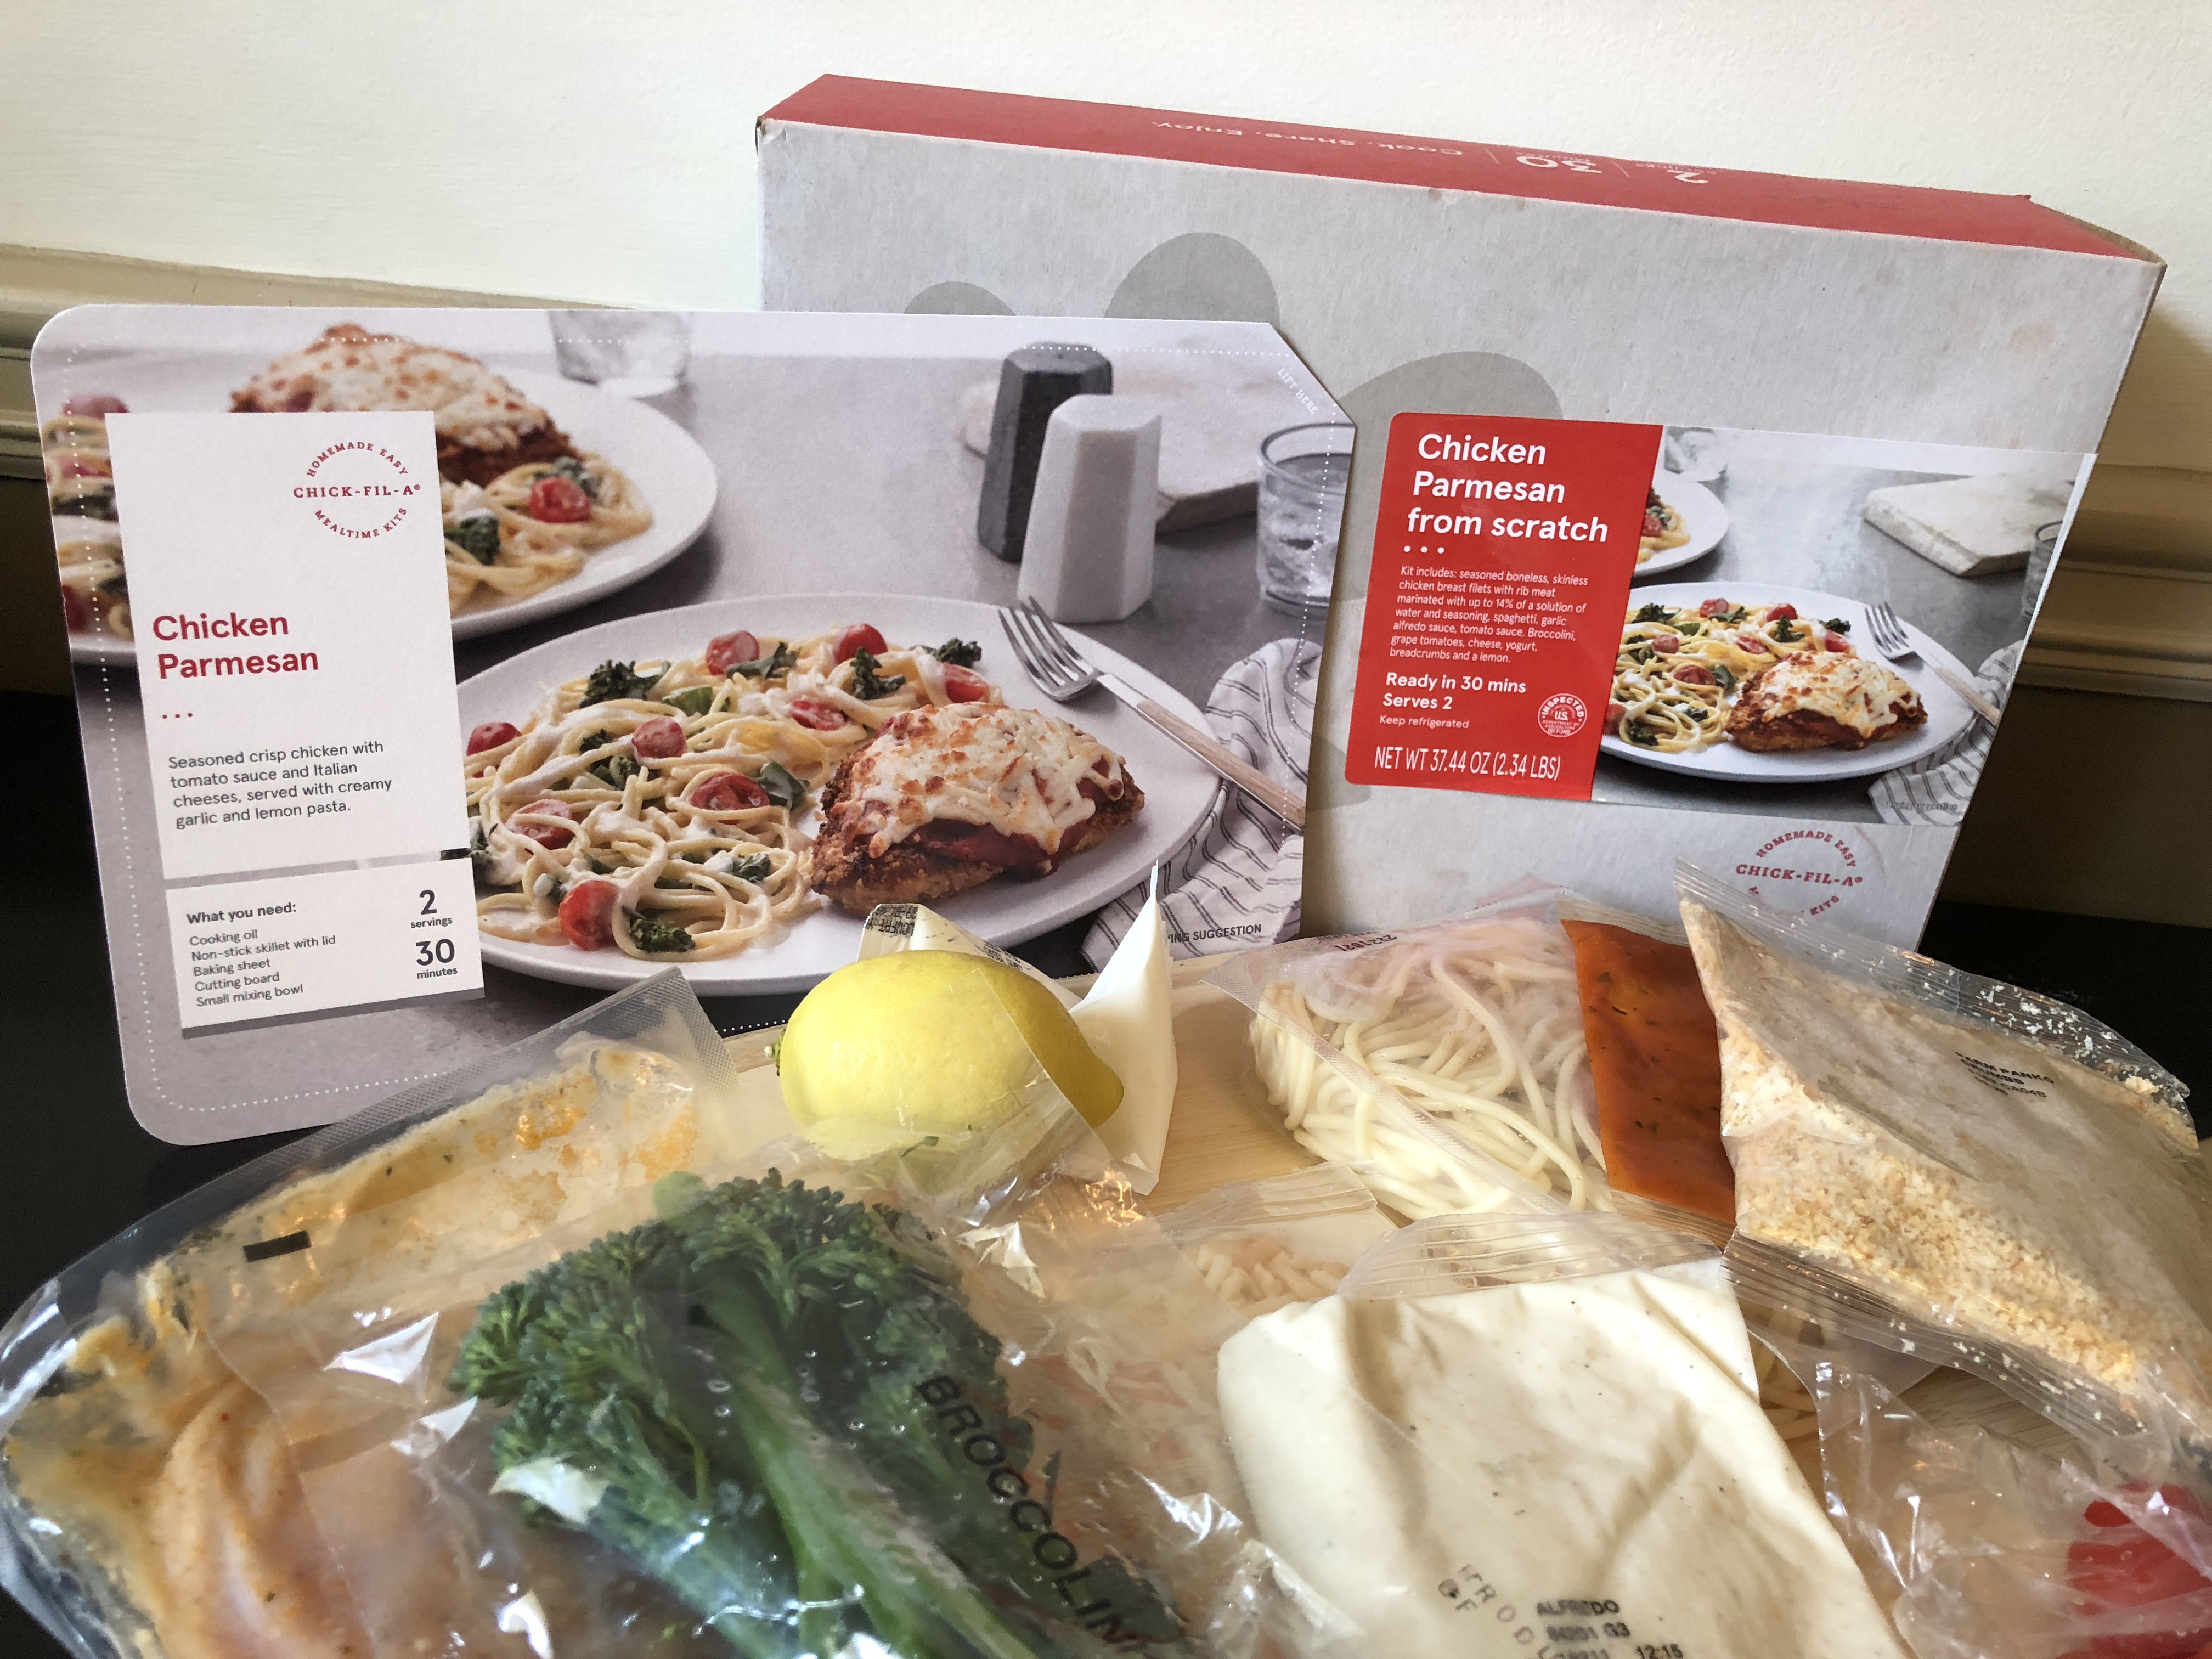 Chick-fil-a Meal Kits like this Chickfila chicken parmesan are now available at participating locations.